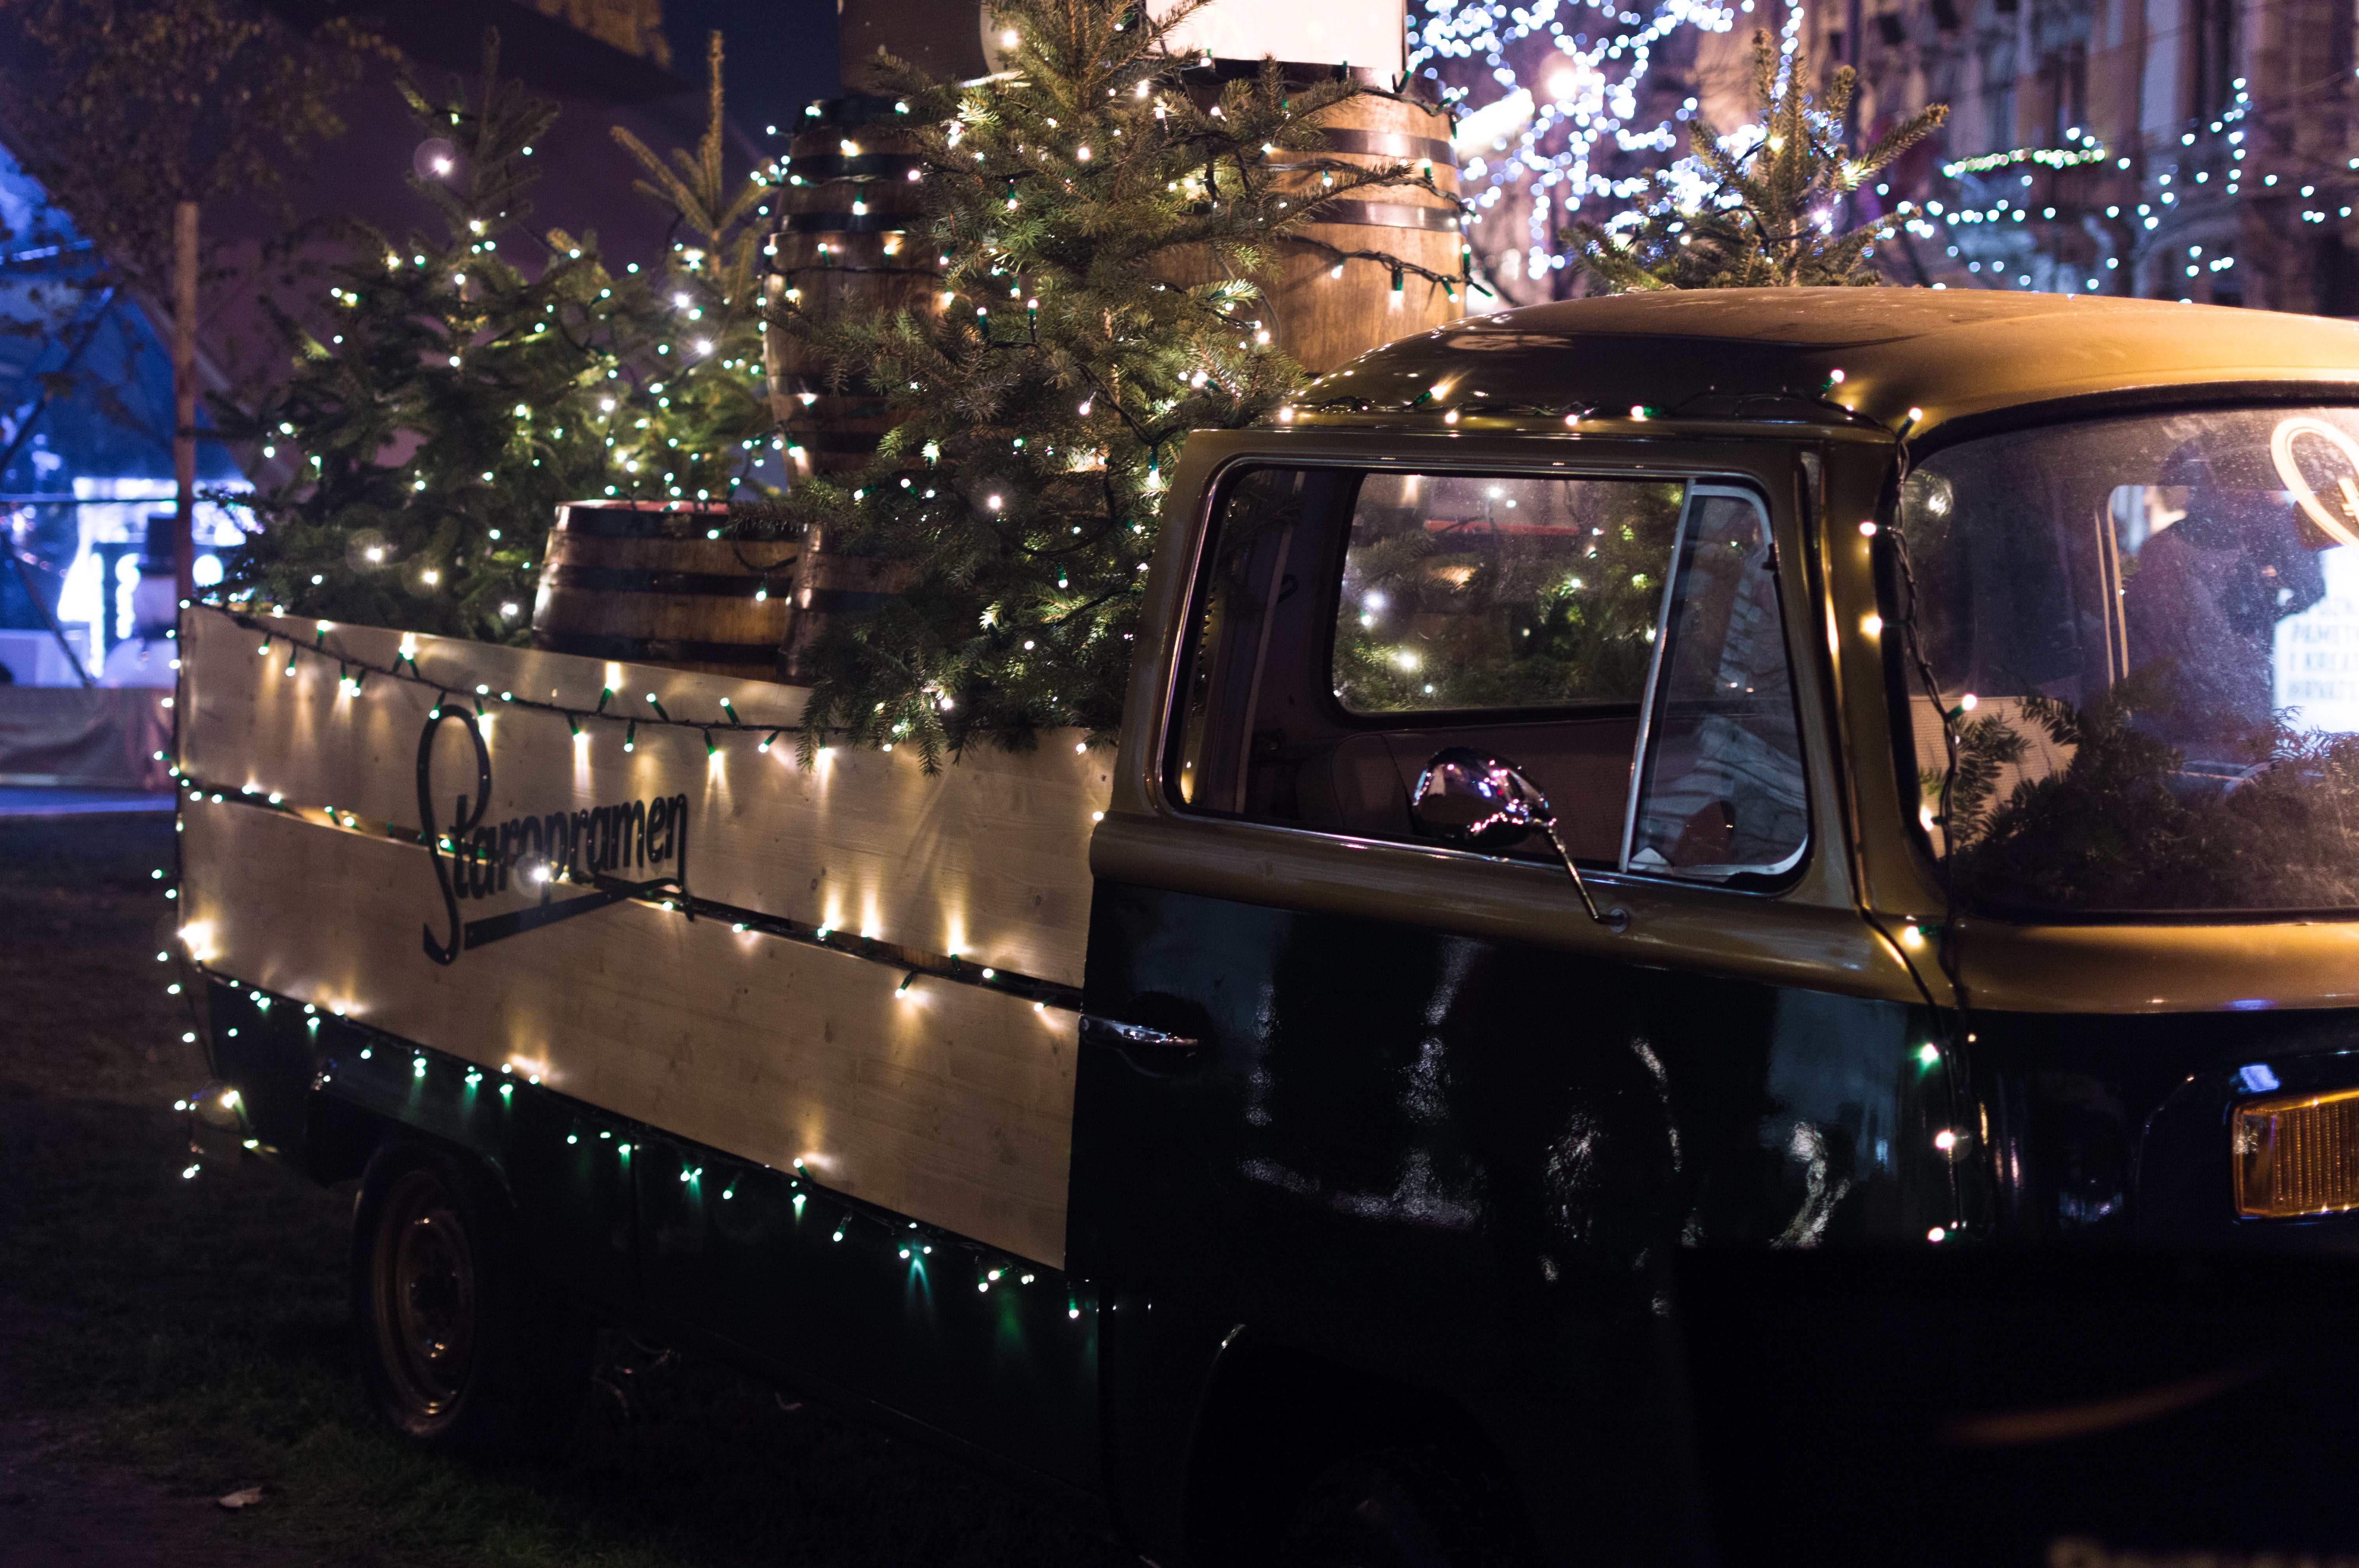 Classic brown single-cab truck with christmas tree photo